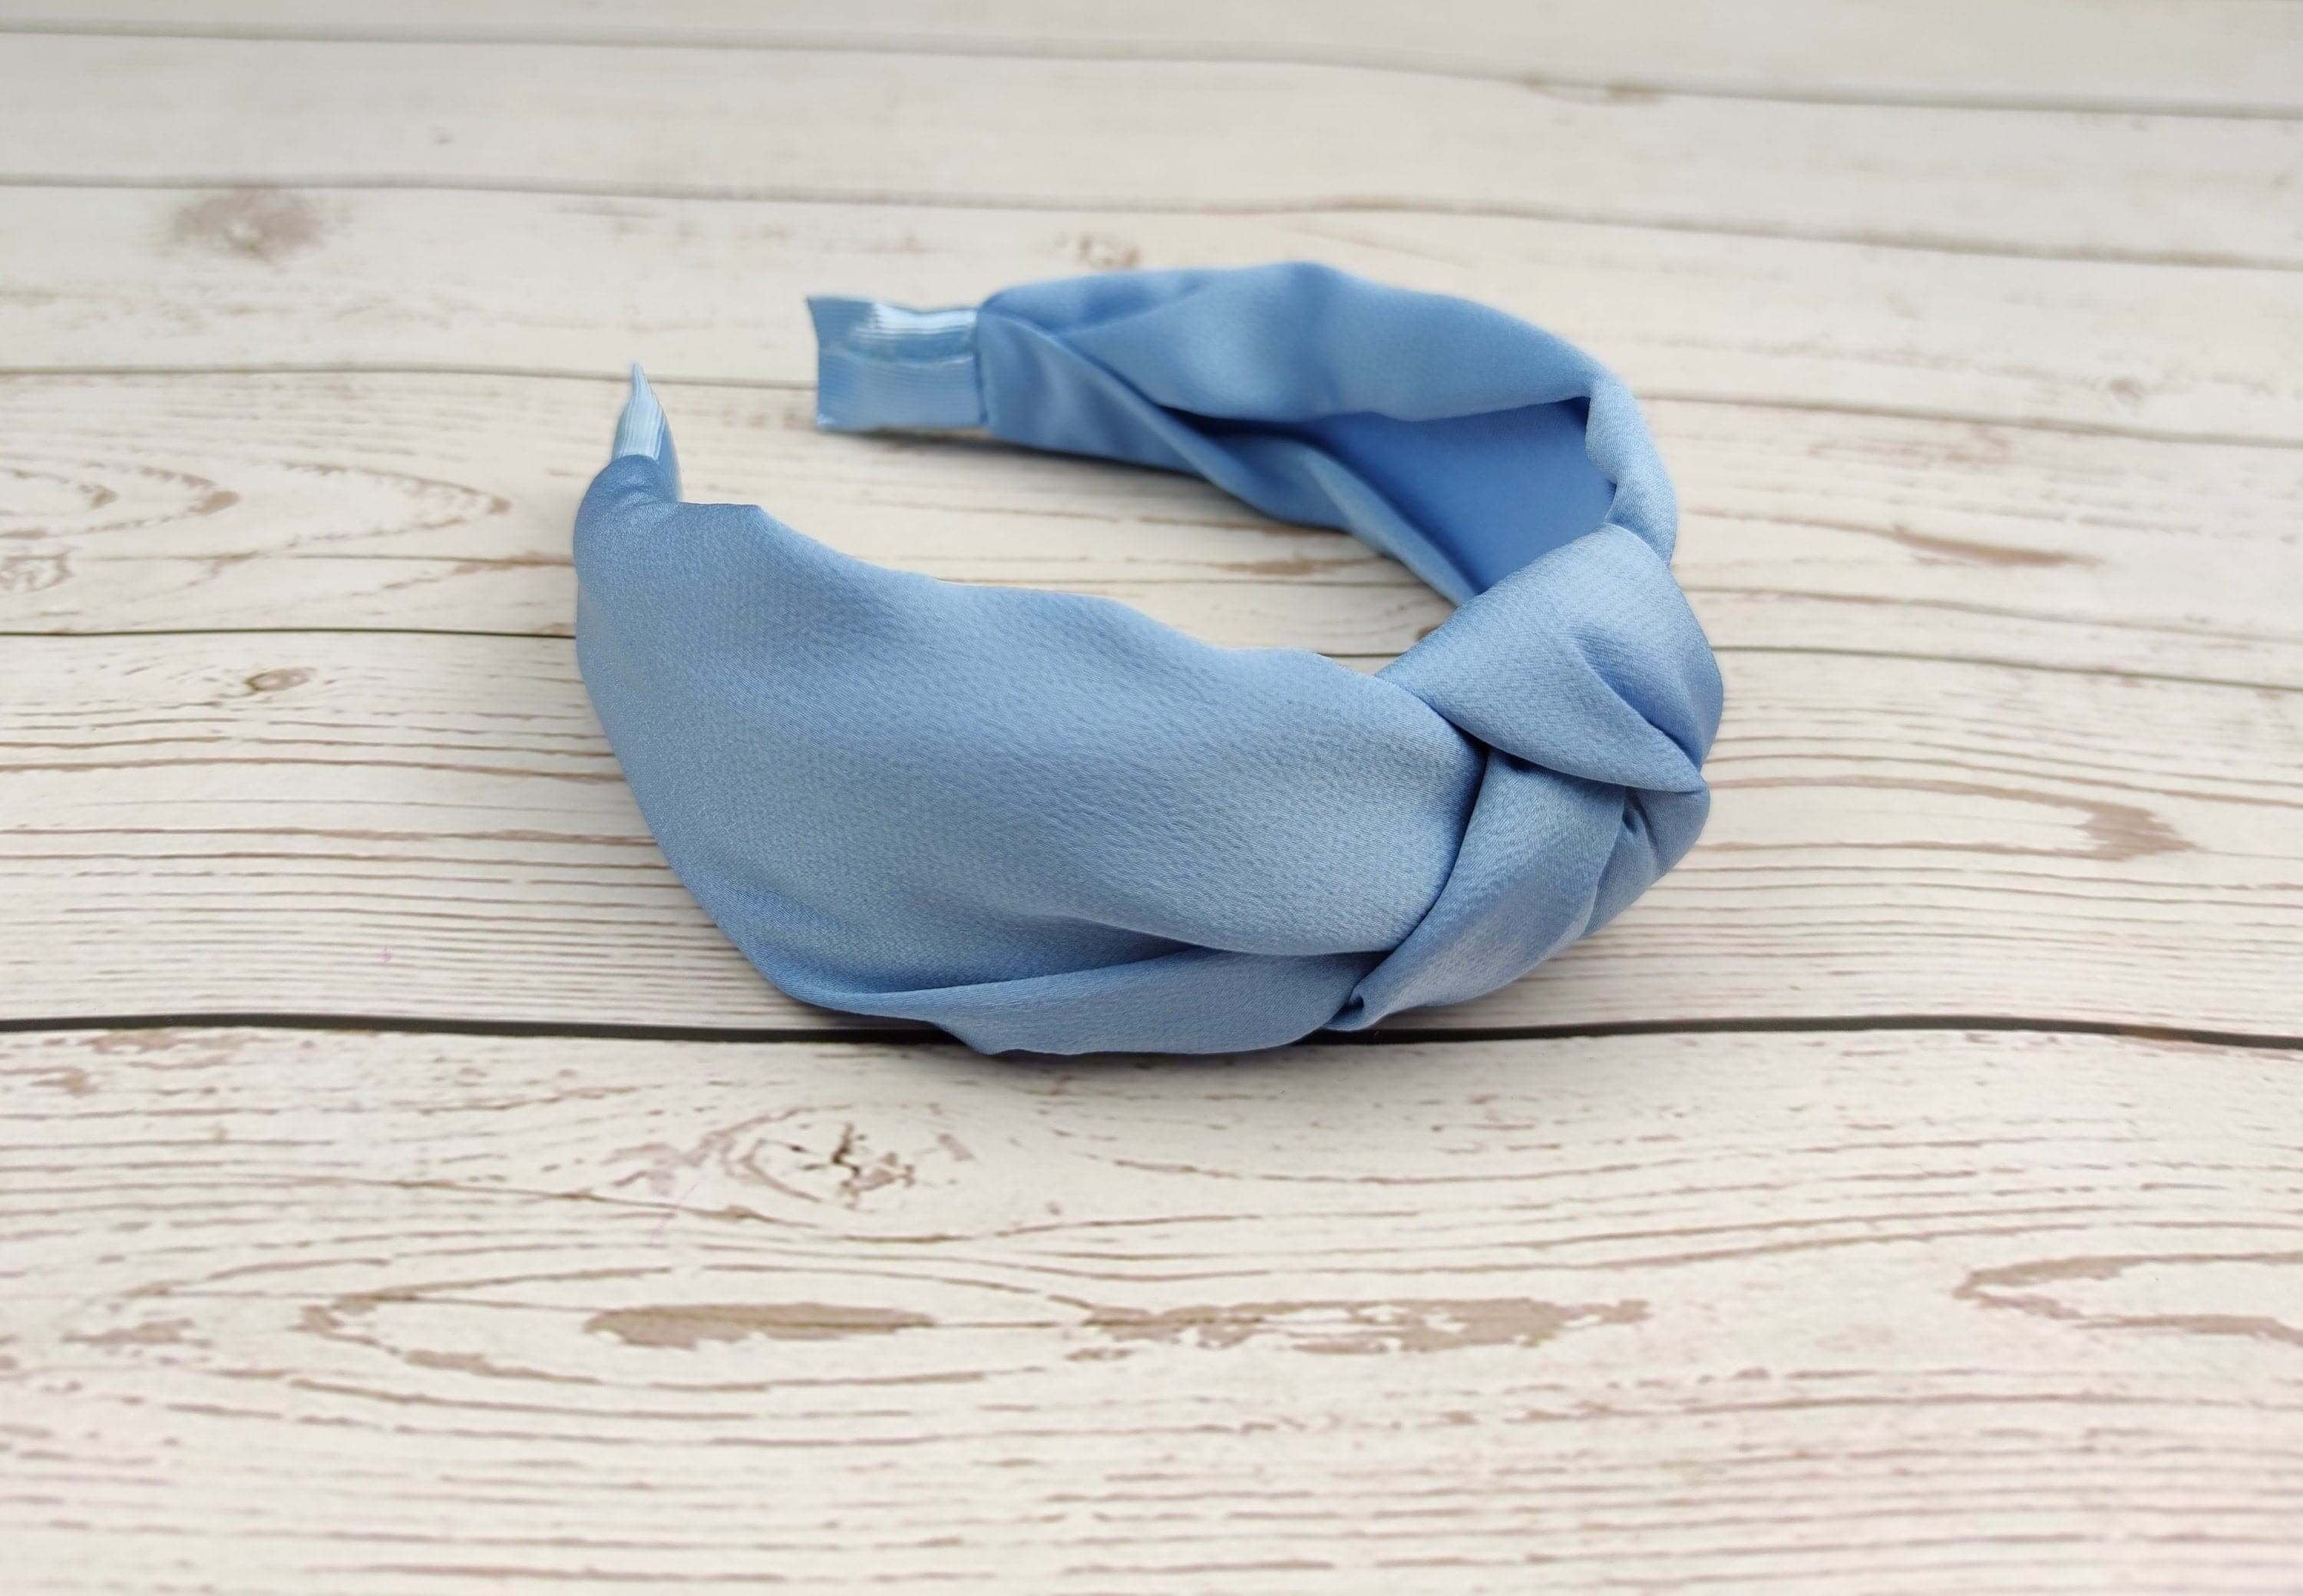 Add some glamour to your outfit with these light blue handmade headbands. From top knot headbands to cloud blue handmade headbands, these will add pizzazz to any outfit you put on!